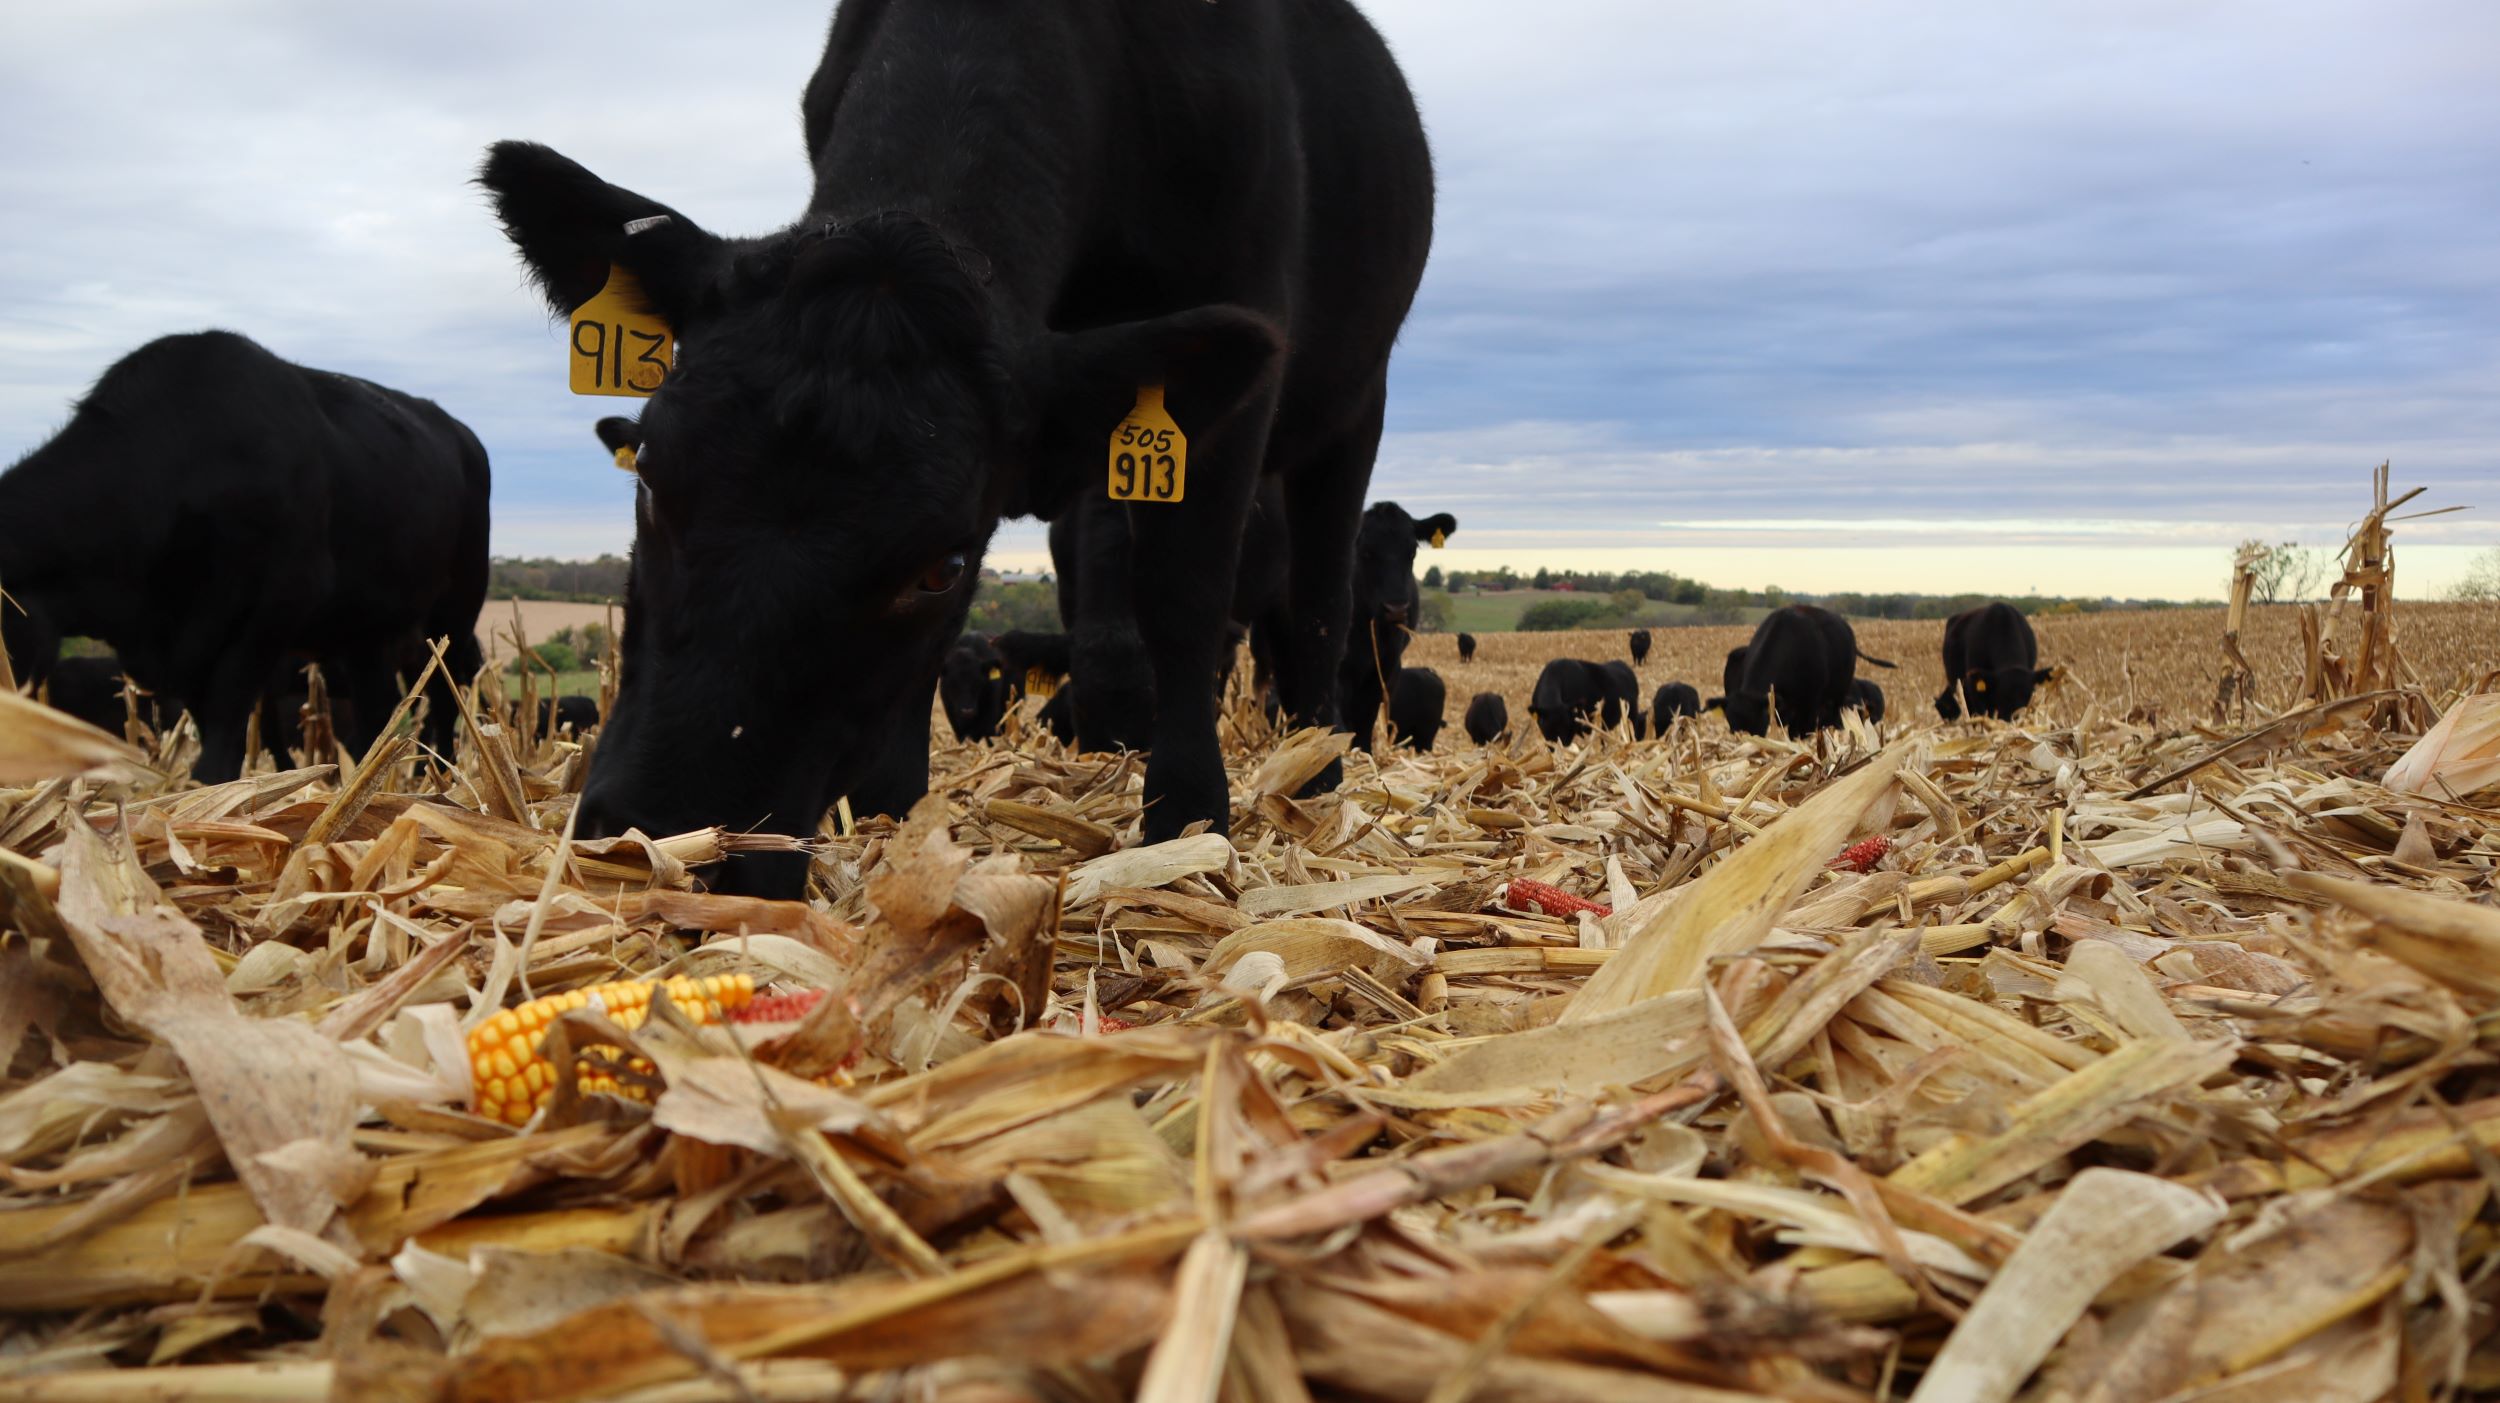 Beef cattle grazing in harvested field of corn (Photo: Iowa State University Extension & Outreach)